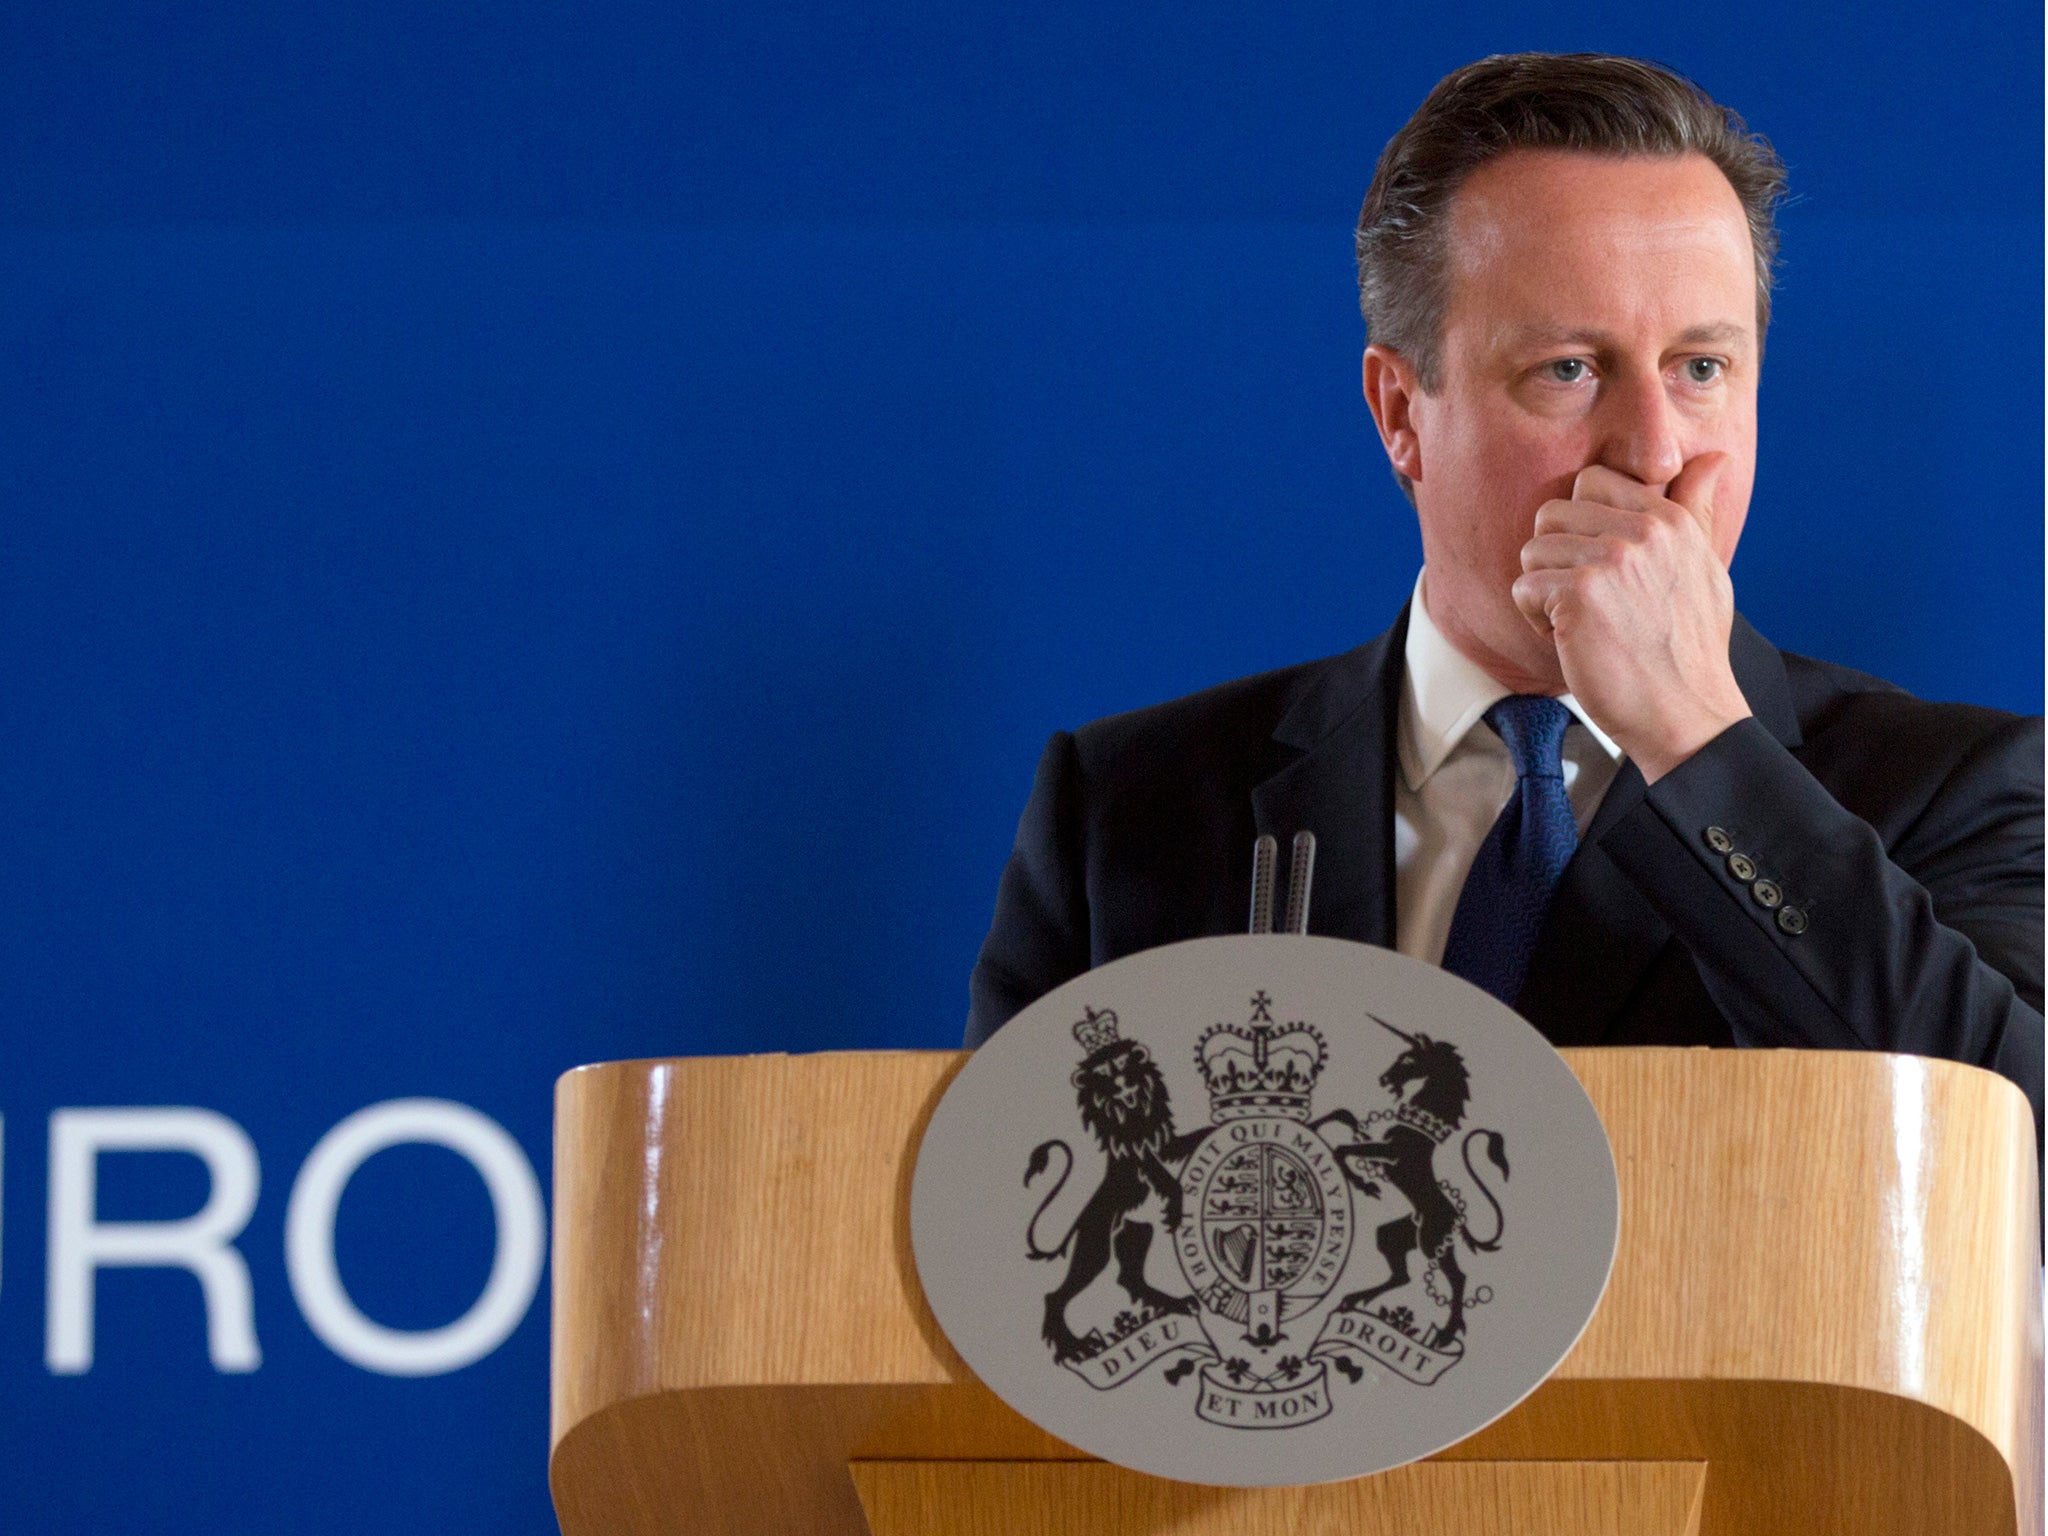 David Cameron during a media conference after an EU summit in Brussels